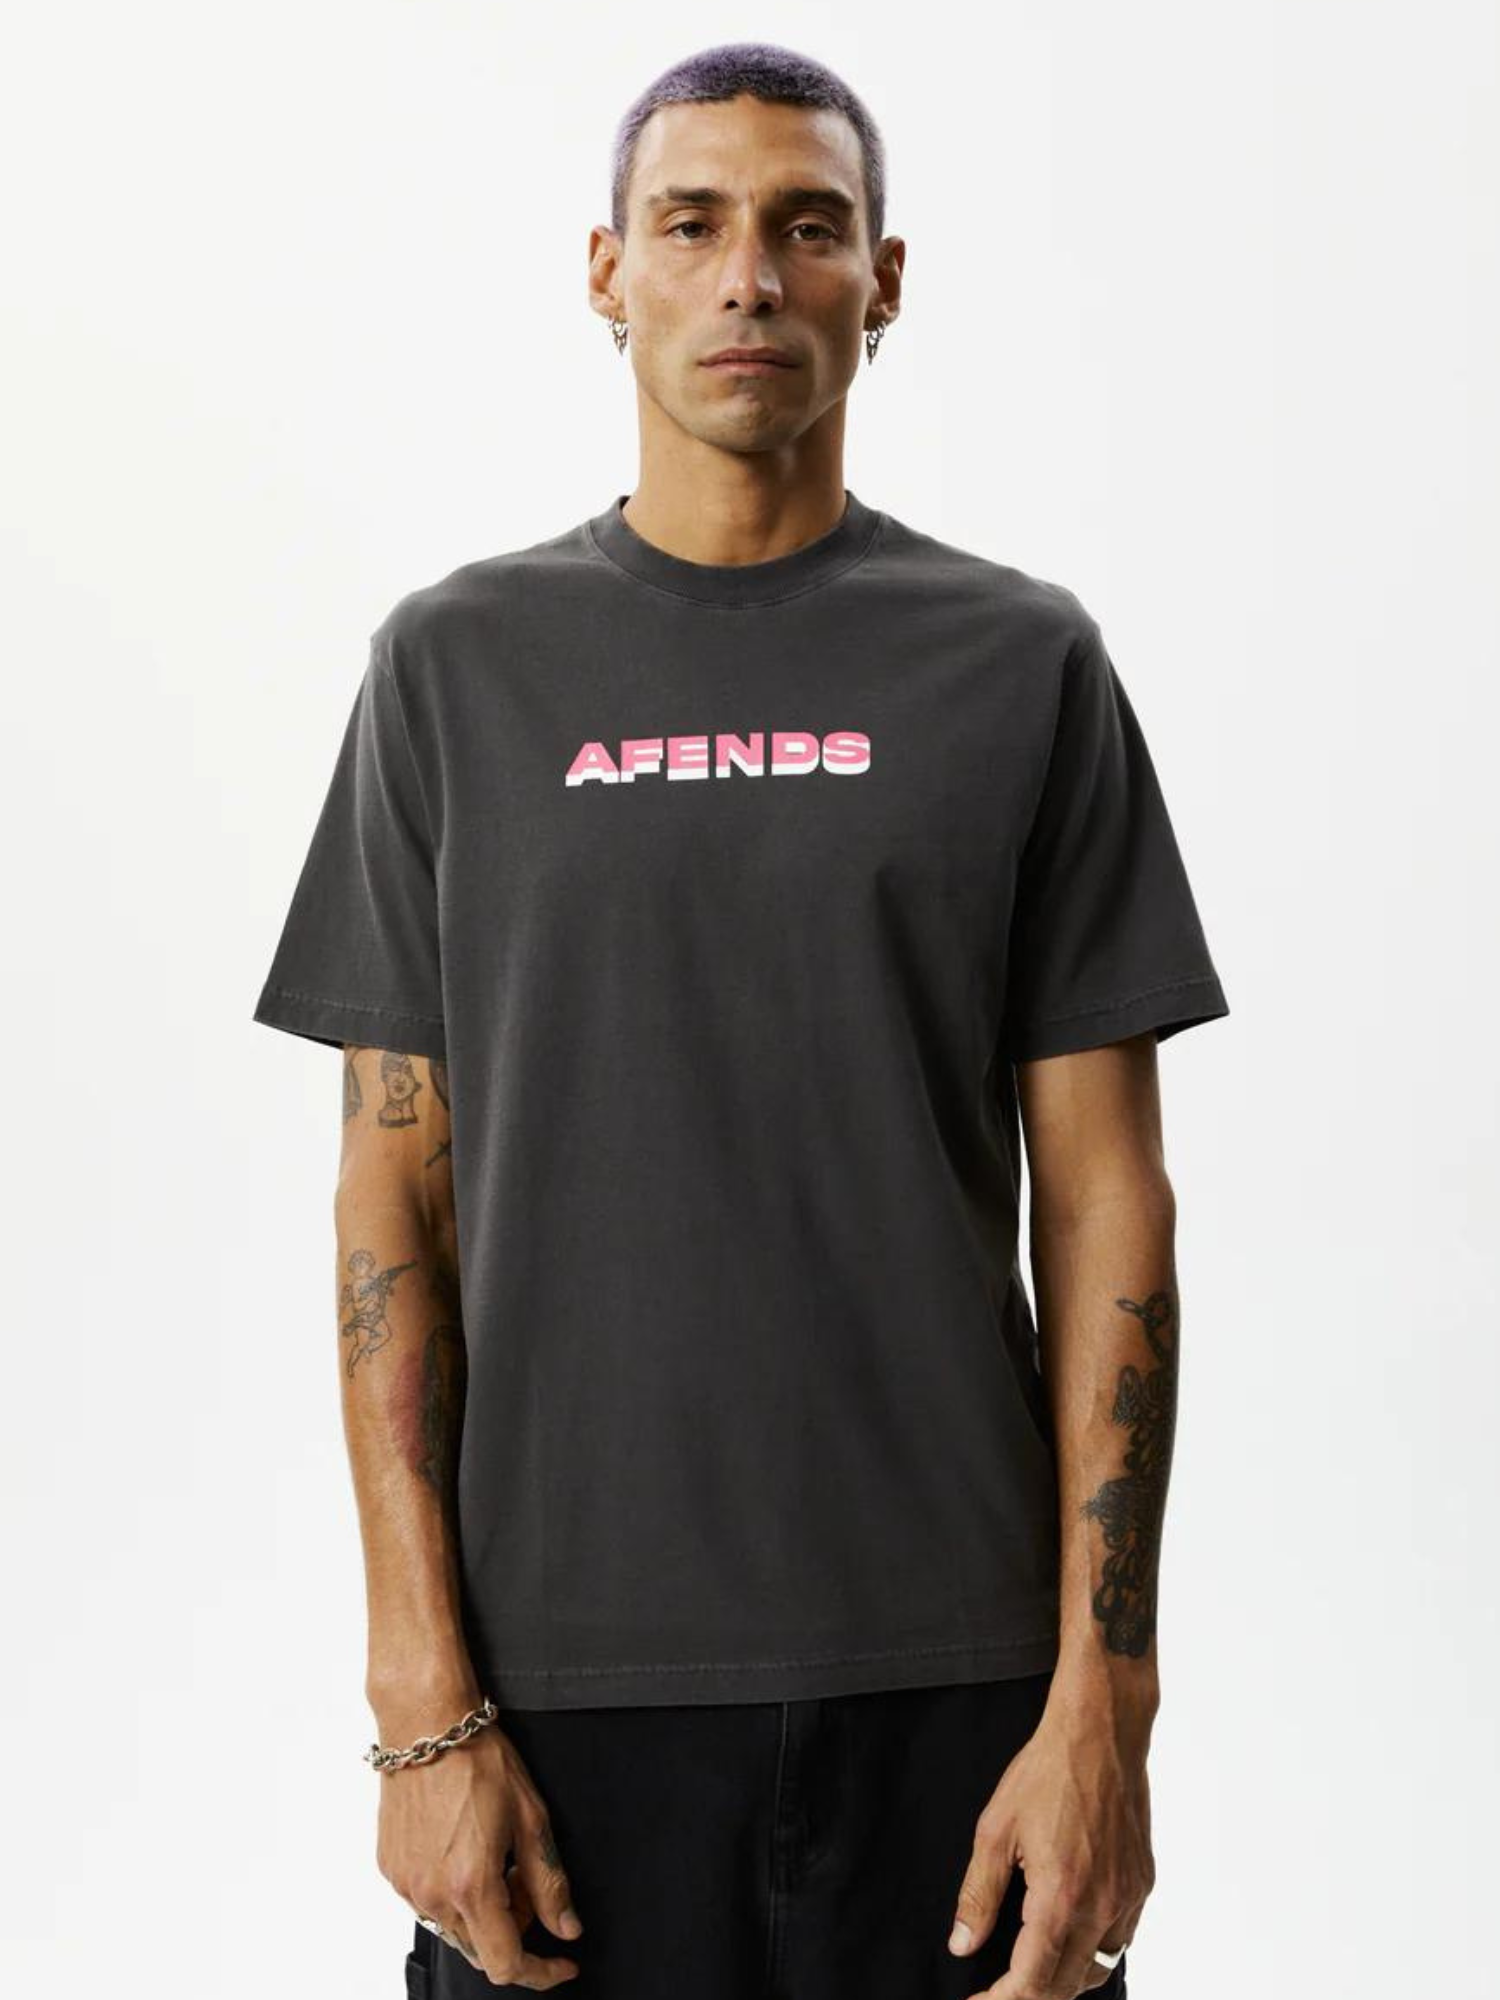 Afends - Volcanic Times Graphic Retro Tee Shirt Stone Black